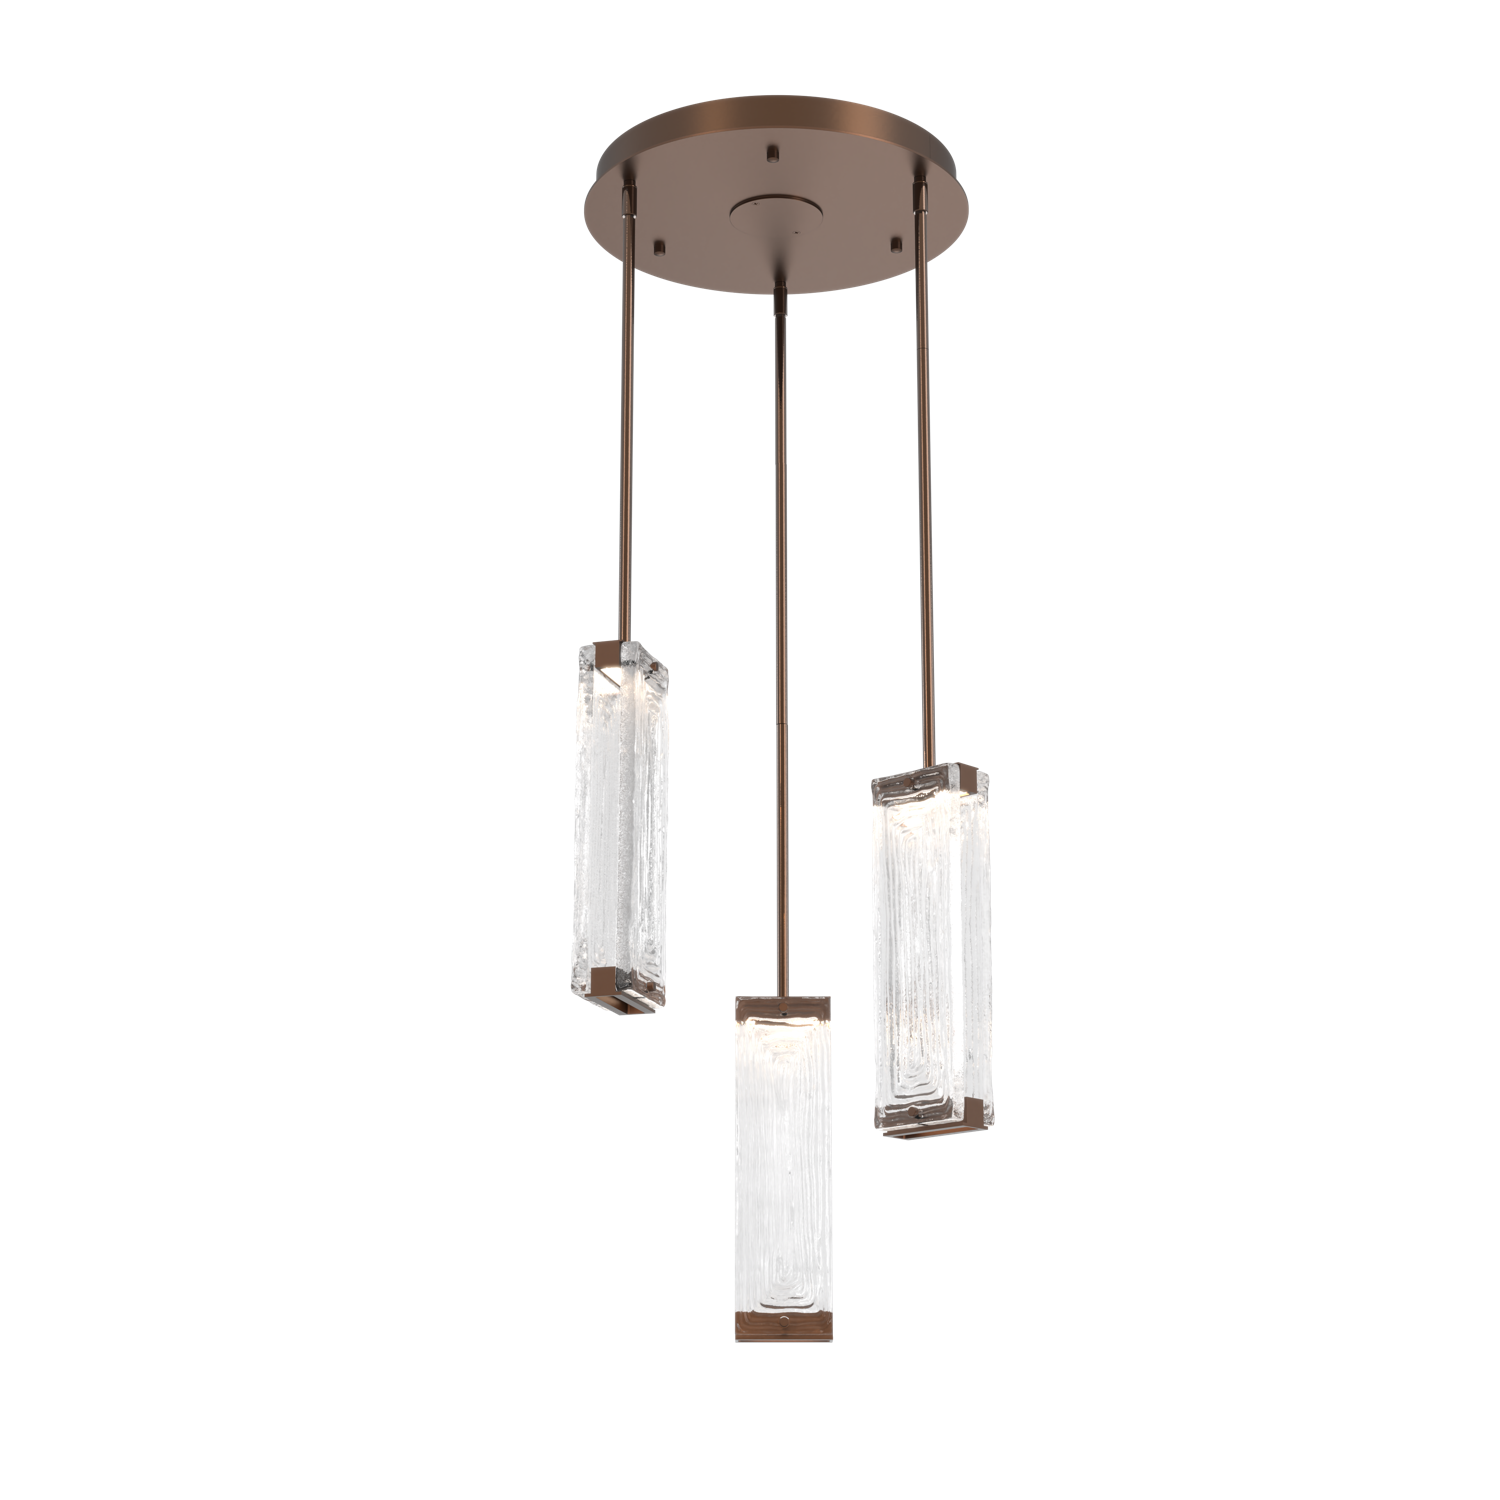 CHB0090-03-BB-TL-Hammerton-Studio-Tabulo-3-light-multi-pendant-chandelier-with-burnished-bronze-finish-and-clear-linea-cast-glass-shade-and-LED-lamping